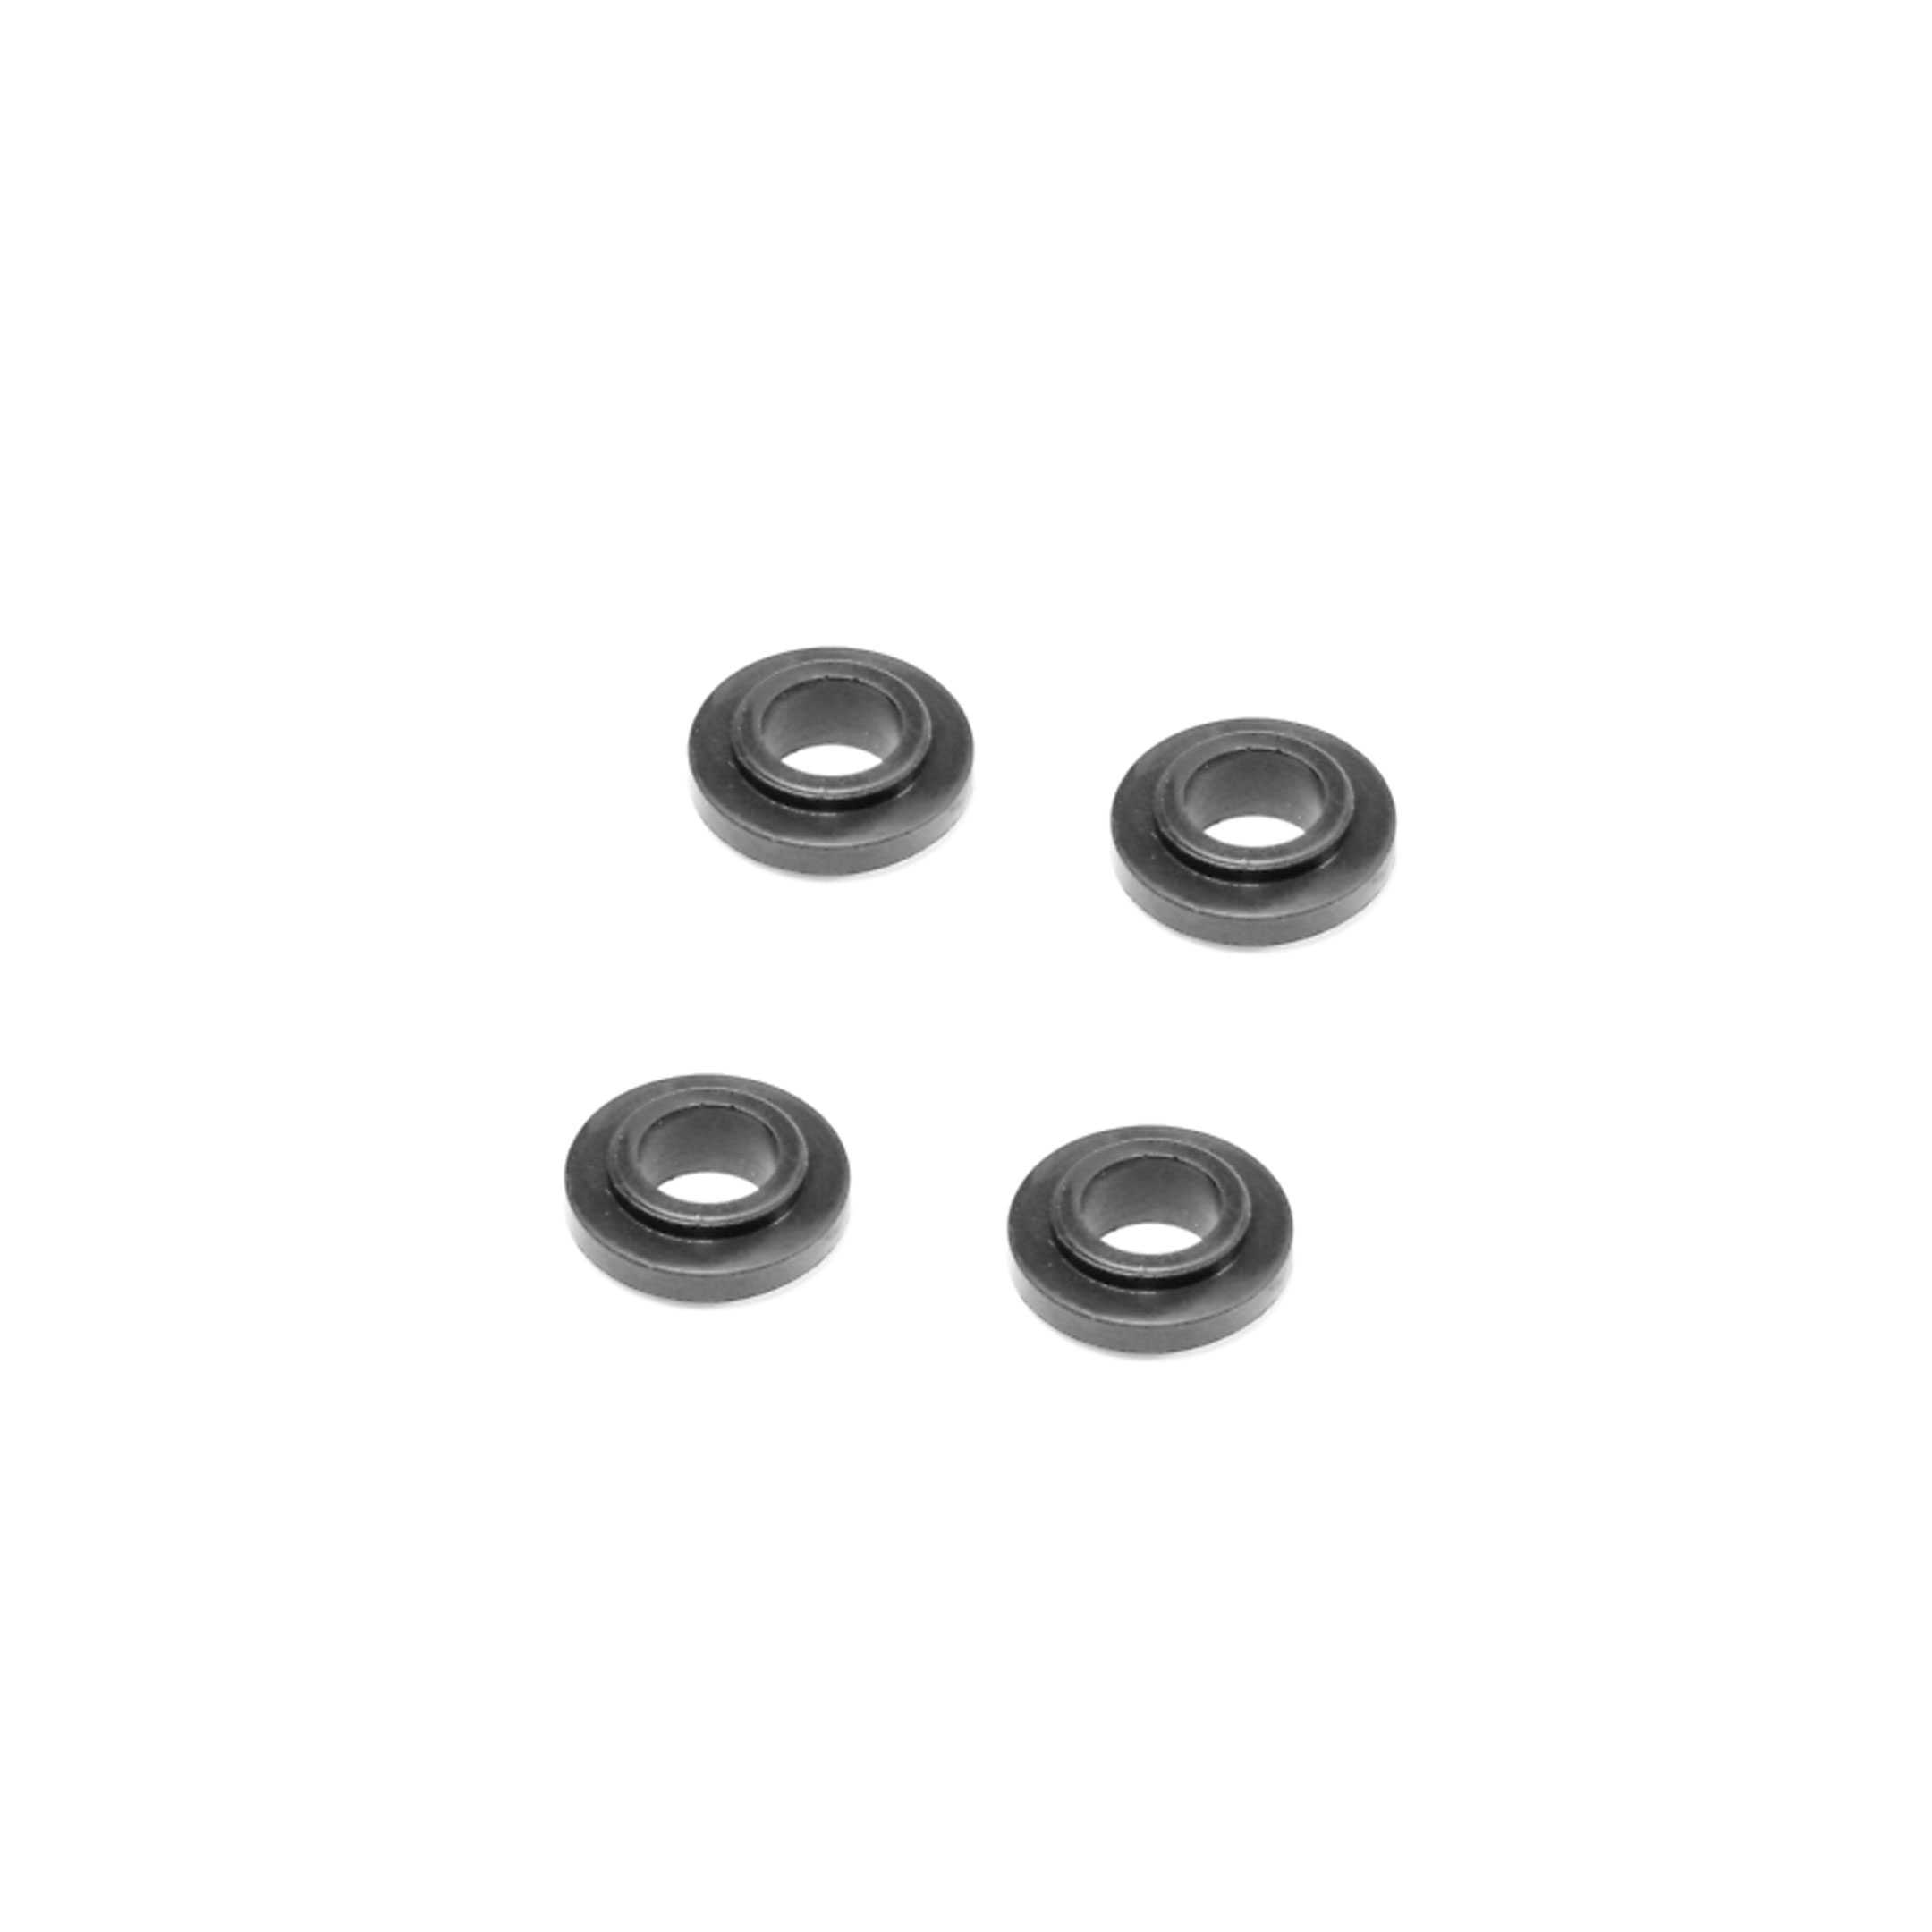 VW Late Model Oil Cooler Seals - 4 Pieces - Beetle - Super - Ghia - Bus - Type 3 - Thing - Vanagon